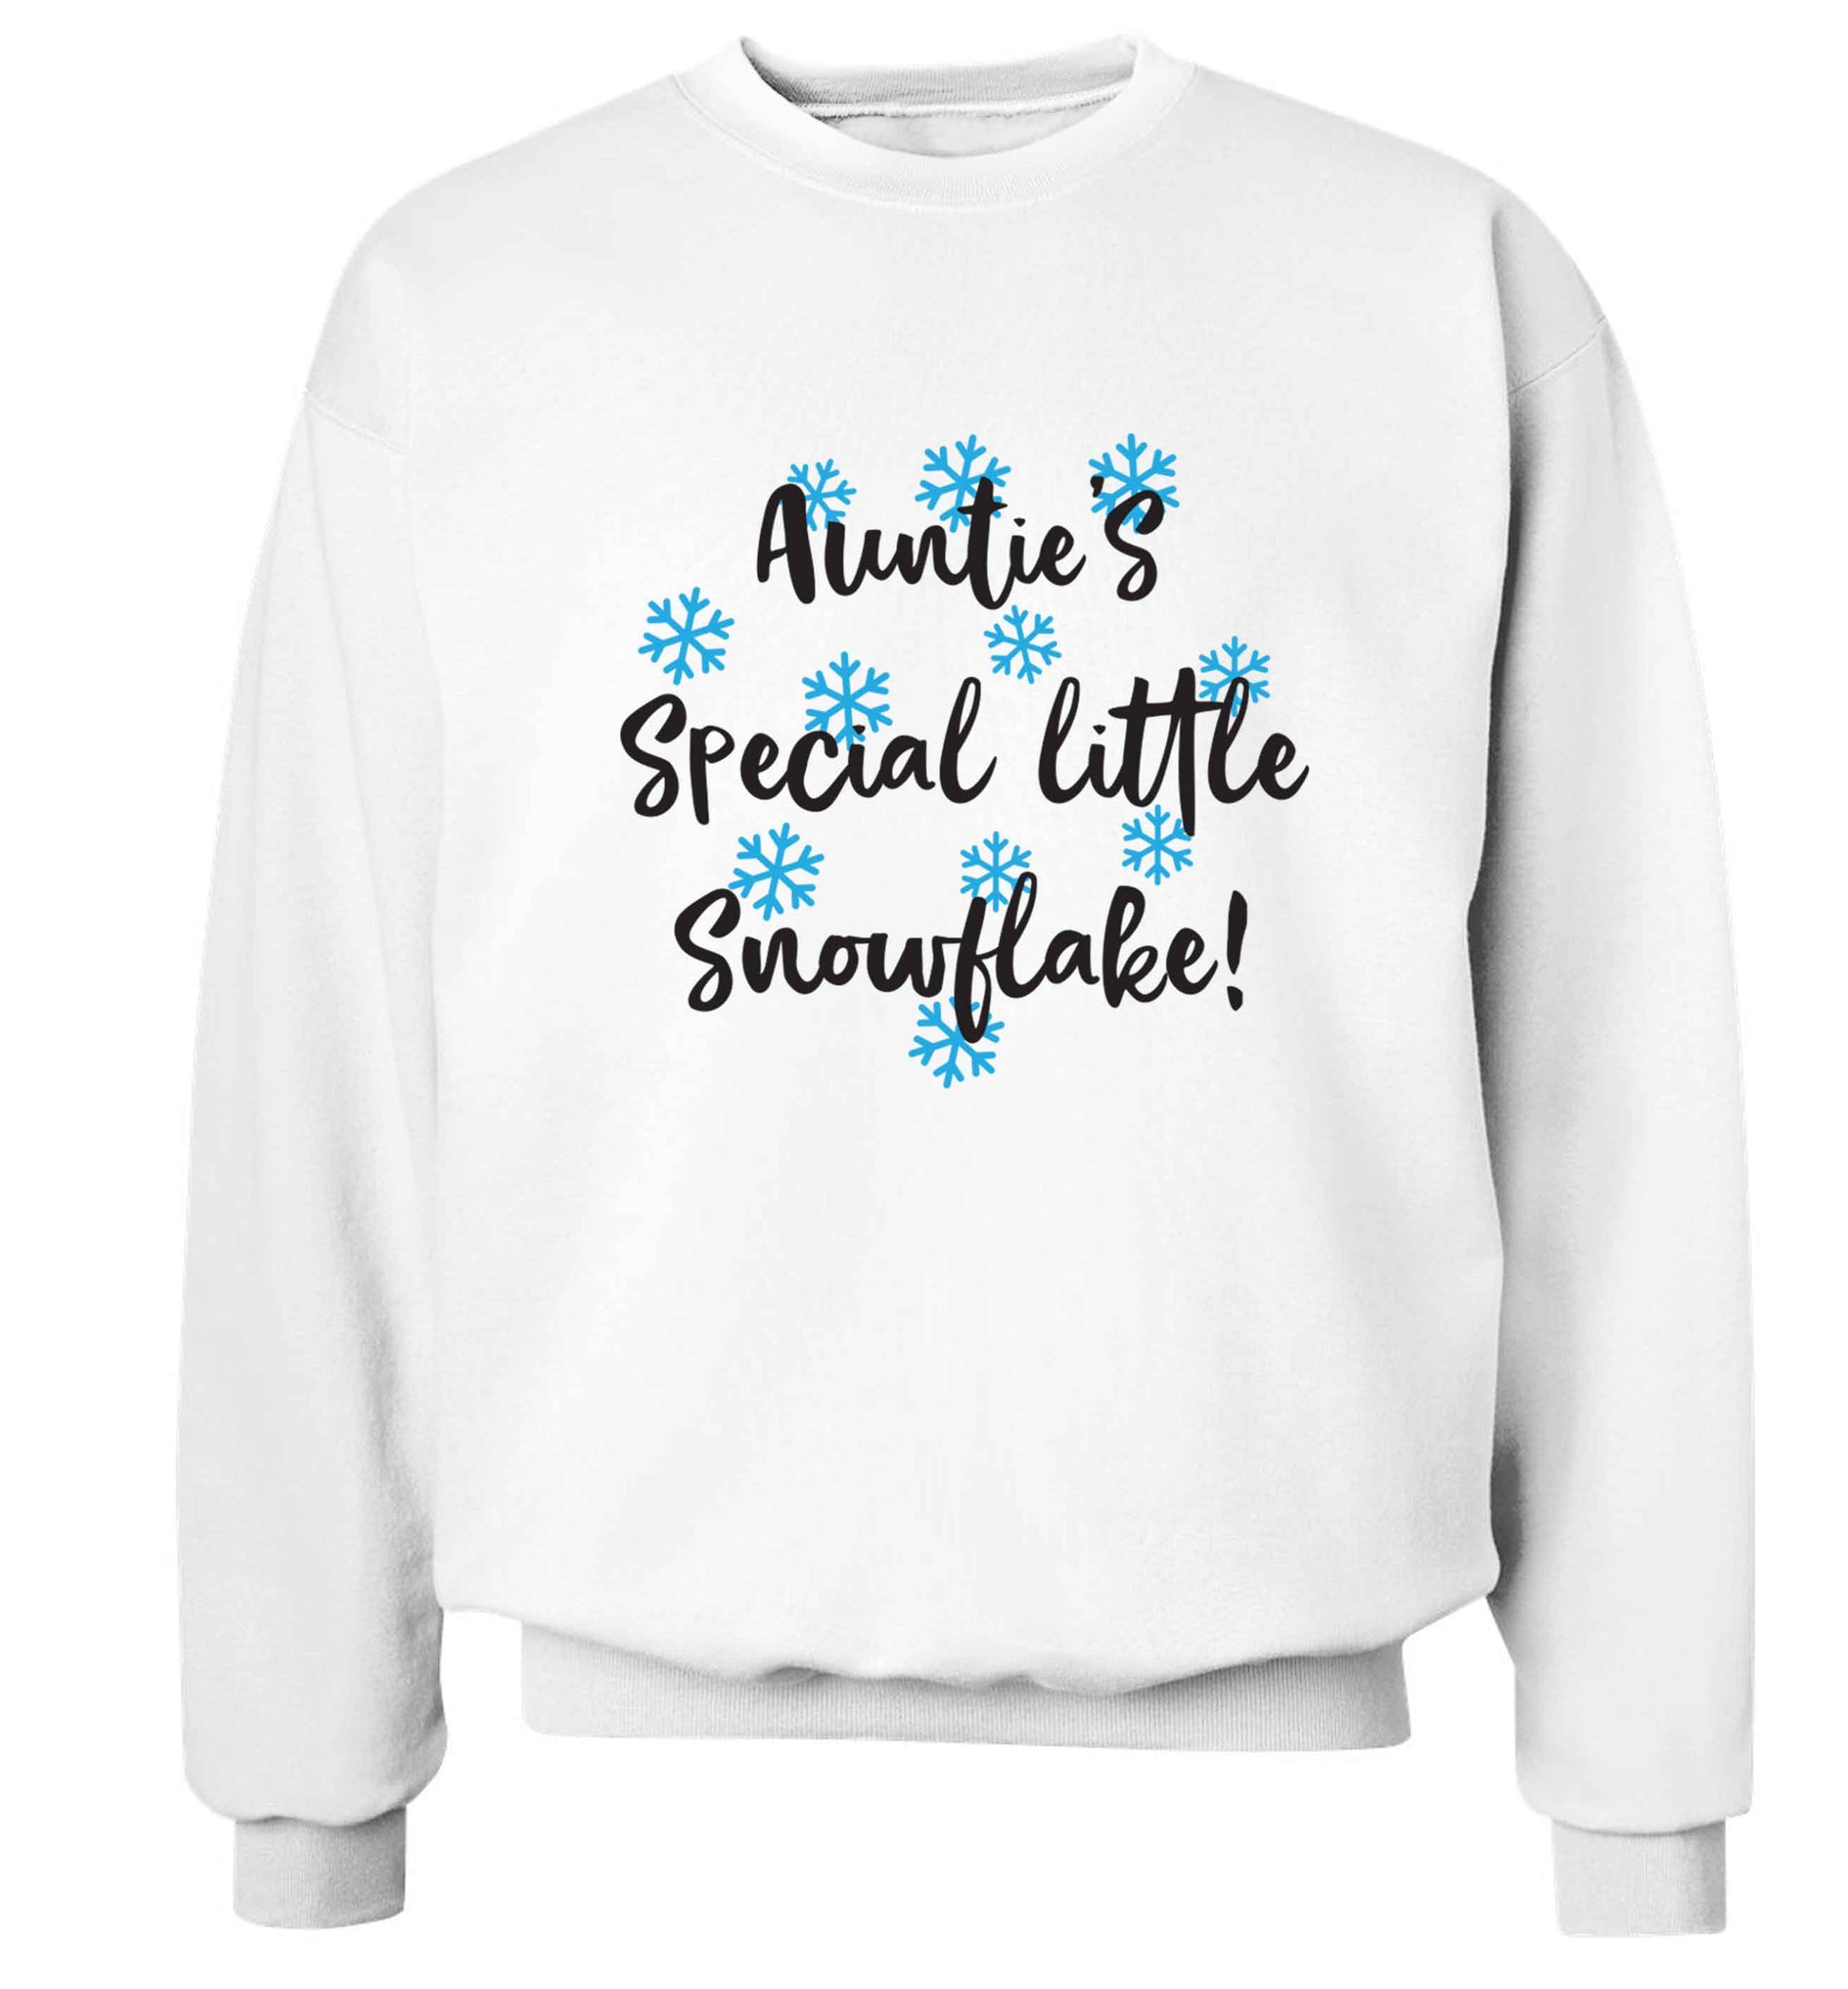 Auntie's special little snowflake Adult's unisex white Sweater 2XL